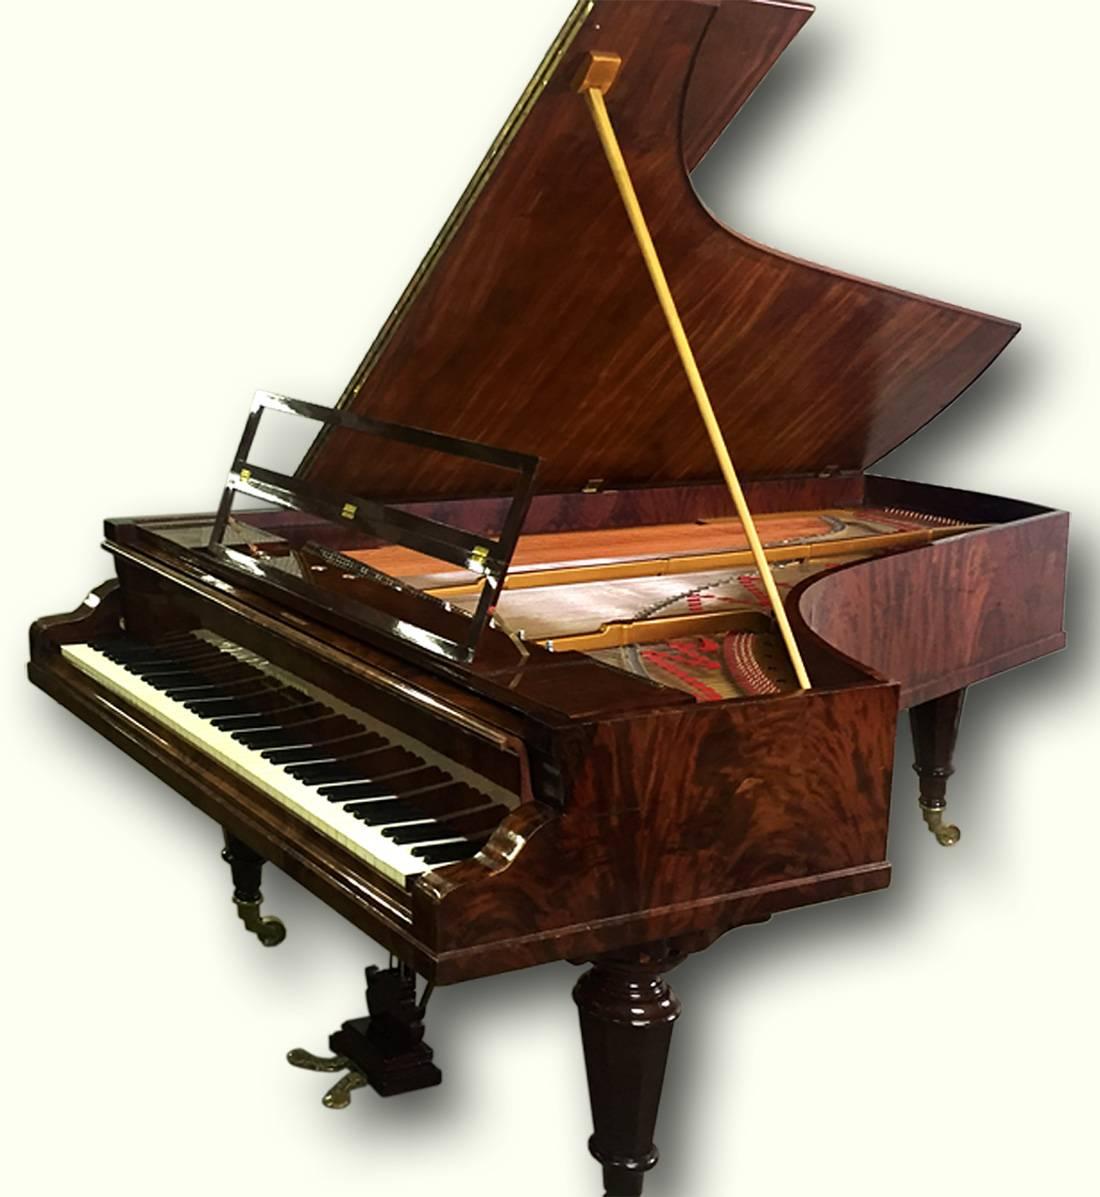 A rare grand fortepiano made by Anton Pfeiffer from Glogau, Silesia, today Poland, circa 1835. 220 cm long with 85 keys. 

This rare period grand piano has been newly and completely restored. The Biedermeier case has a high glossy hand made French